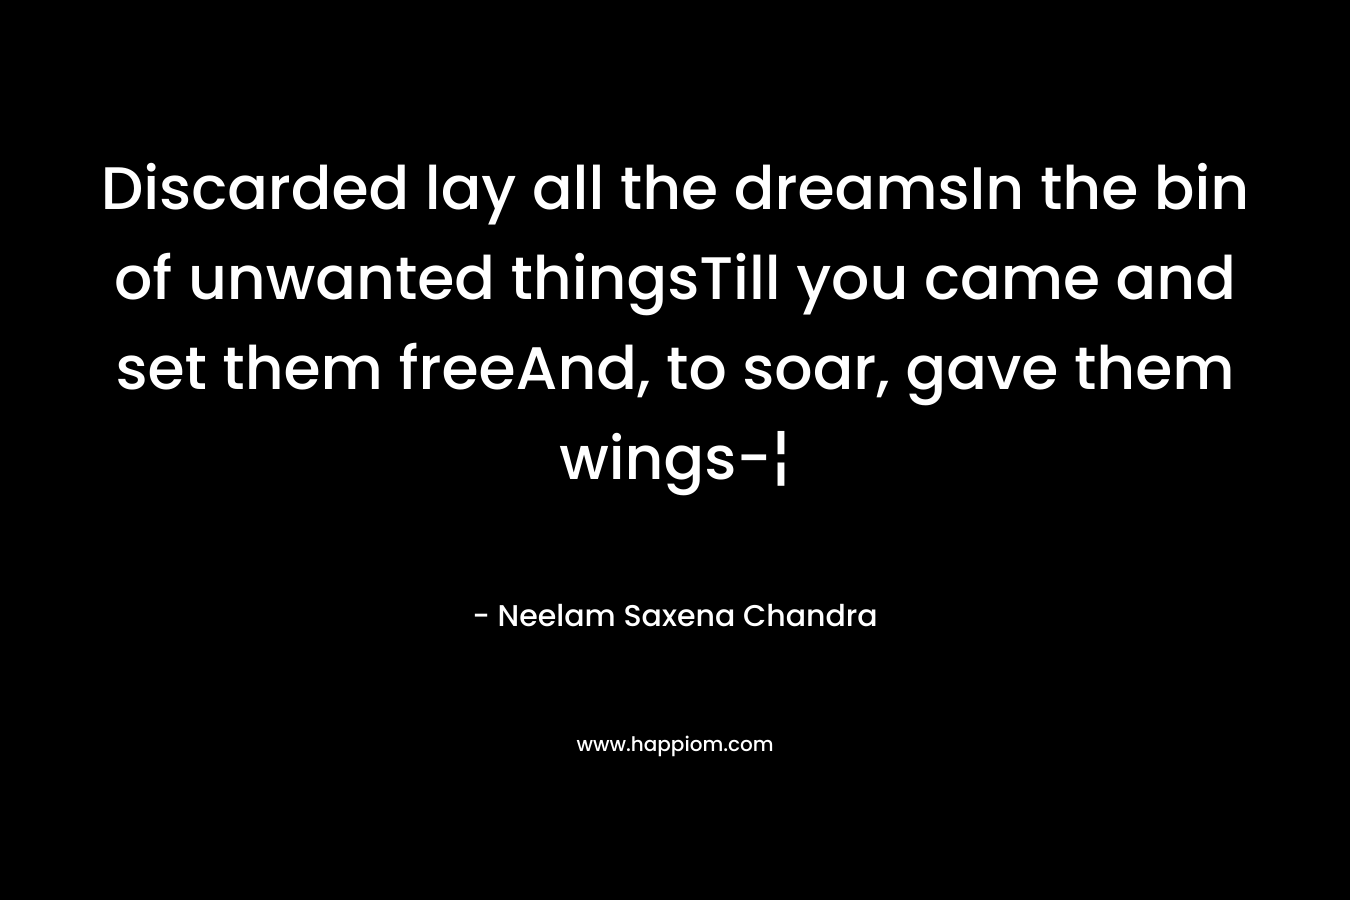 Discarded lay all the dreamsIn the bin of unwanted thingsTill you came and set them freeAnd, to soar, gave them wings-¦ – Neelam Saxena Chandra